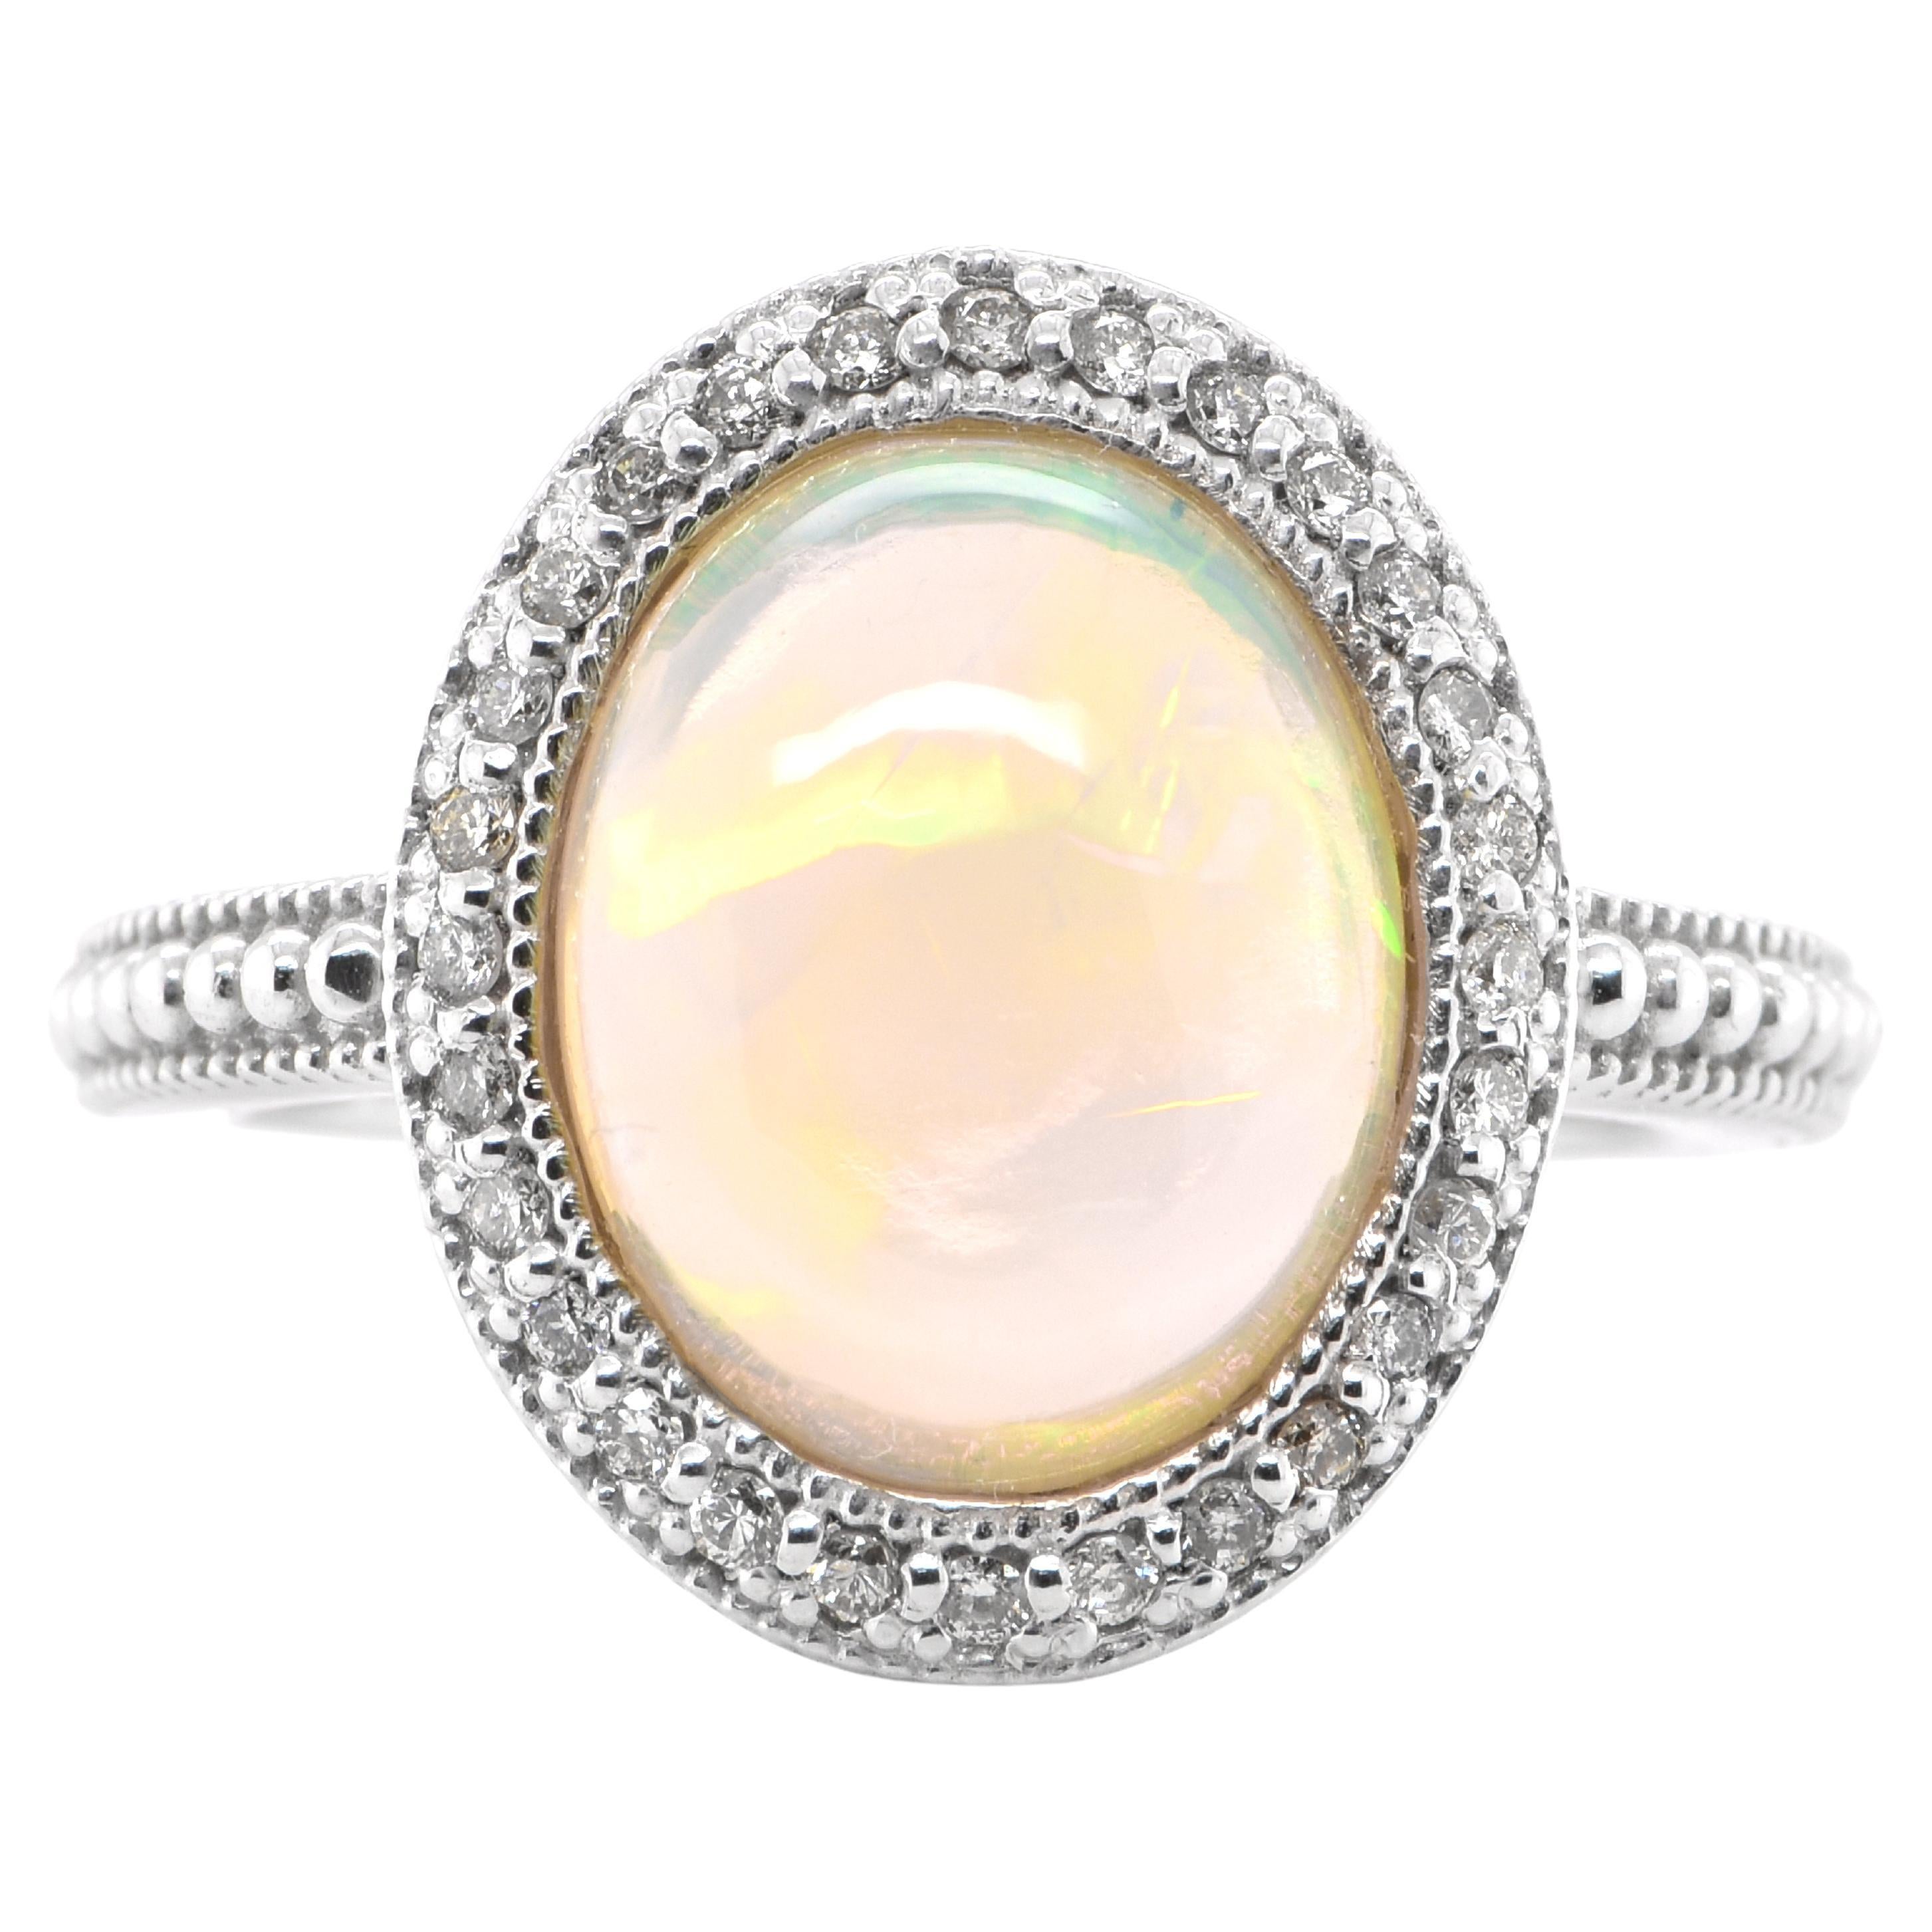 3.54 Carat Natural White Opal and Diamond Vintage Ring Set in 18K White Gold